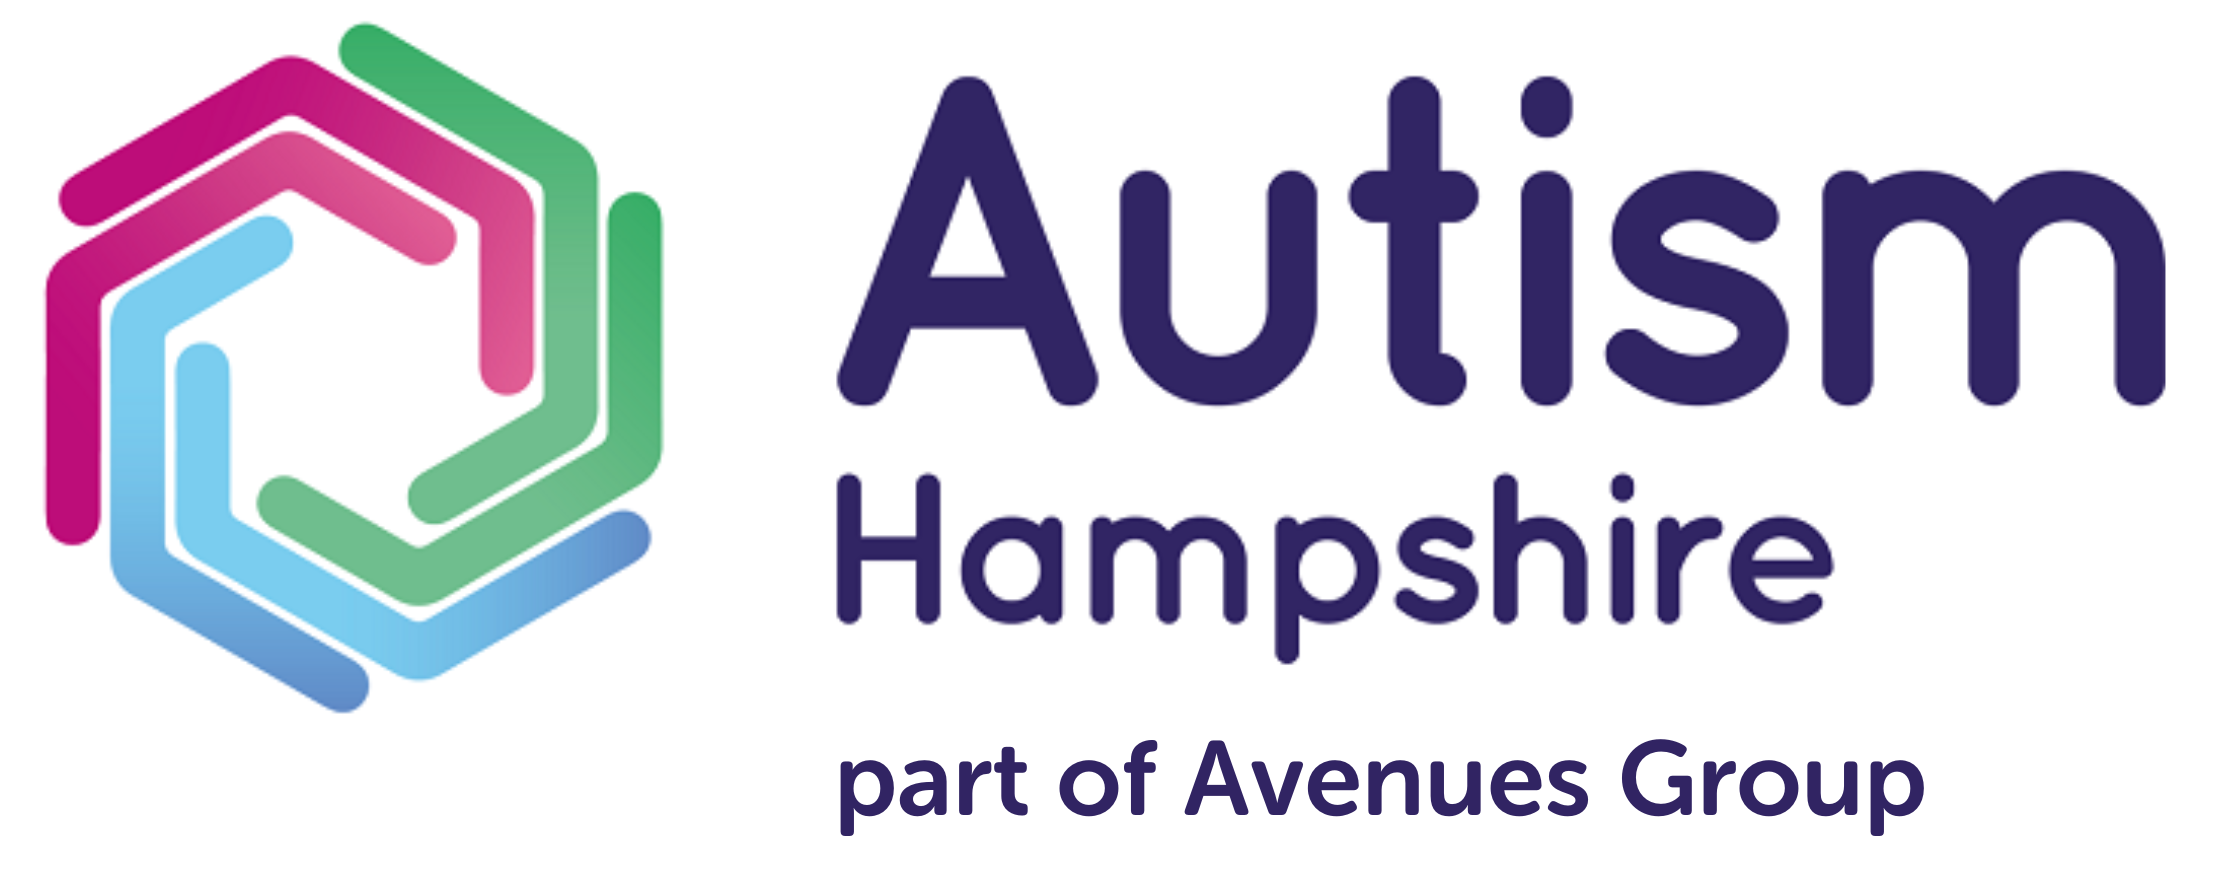 Autism Hampshire logo with Avenues Group”>
					<span class=